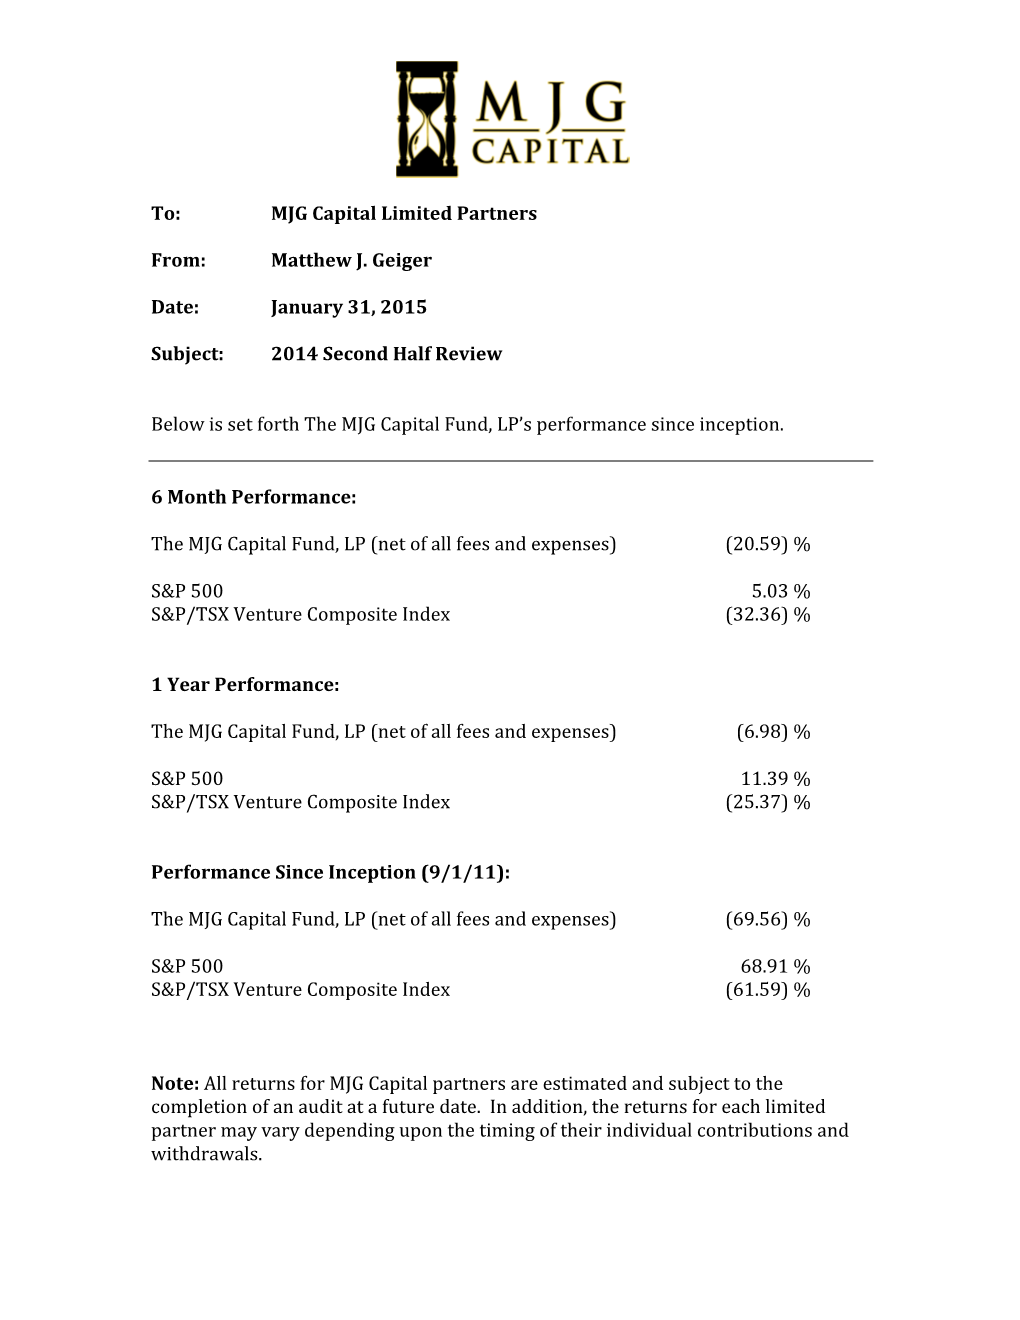 To: MJG Capital Limited Partners From: Matthew J. Geiger Date: January